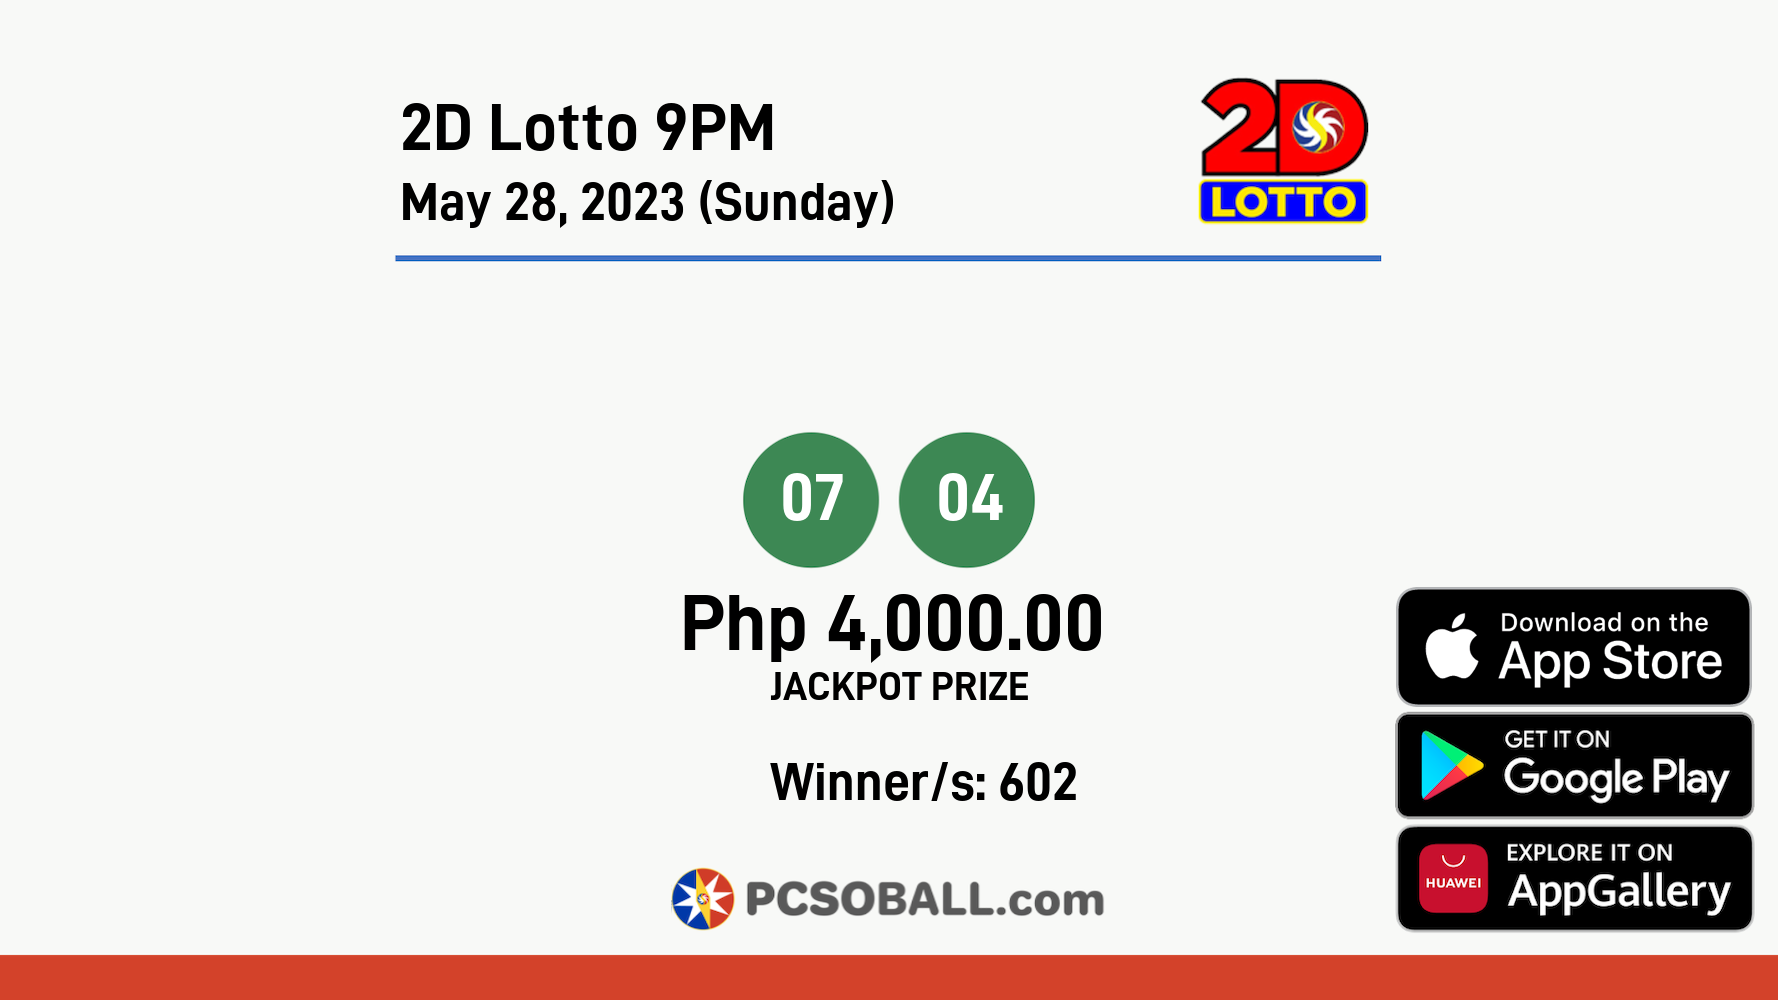 2D Lotto 9PM May 28, 2023 (Sunday) Result